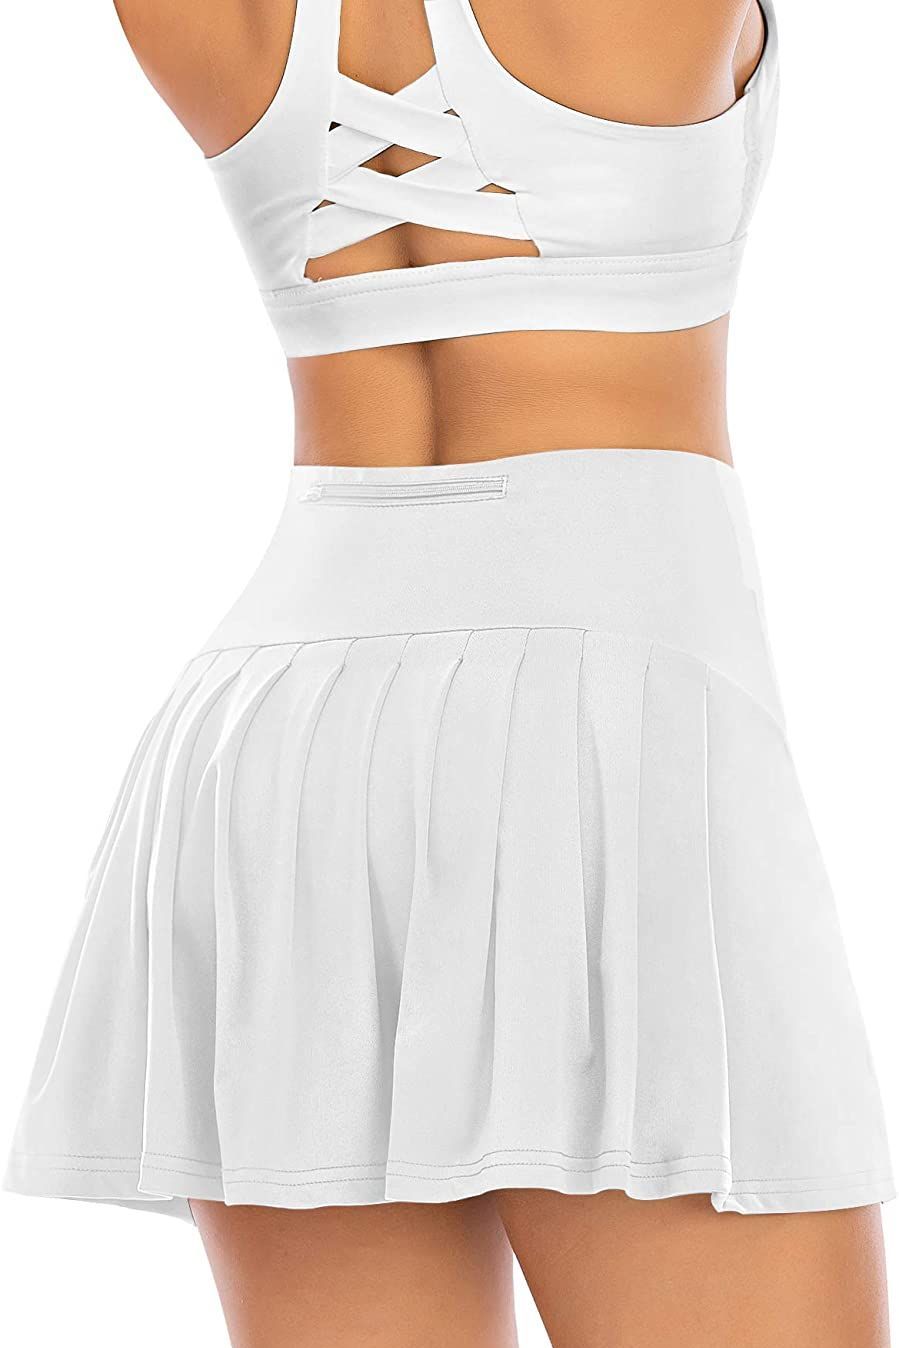 Tennis Skirt with Pockets